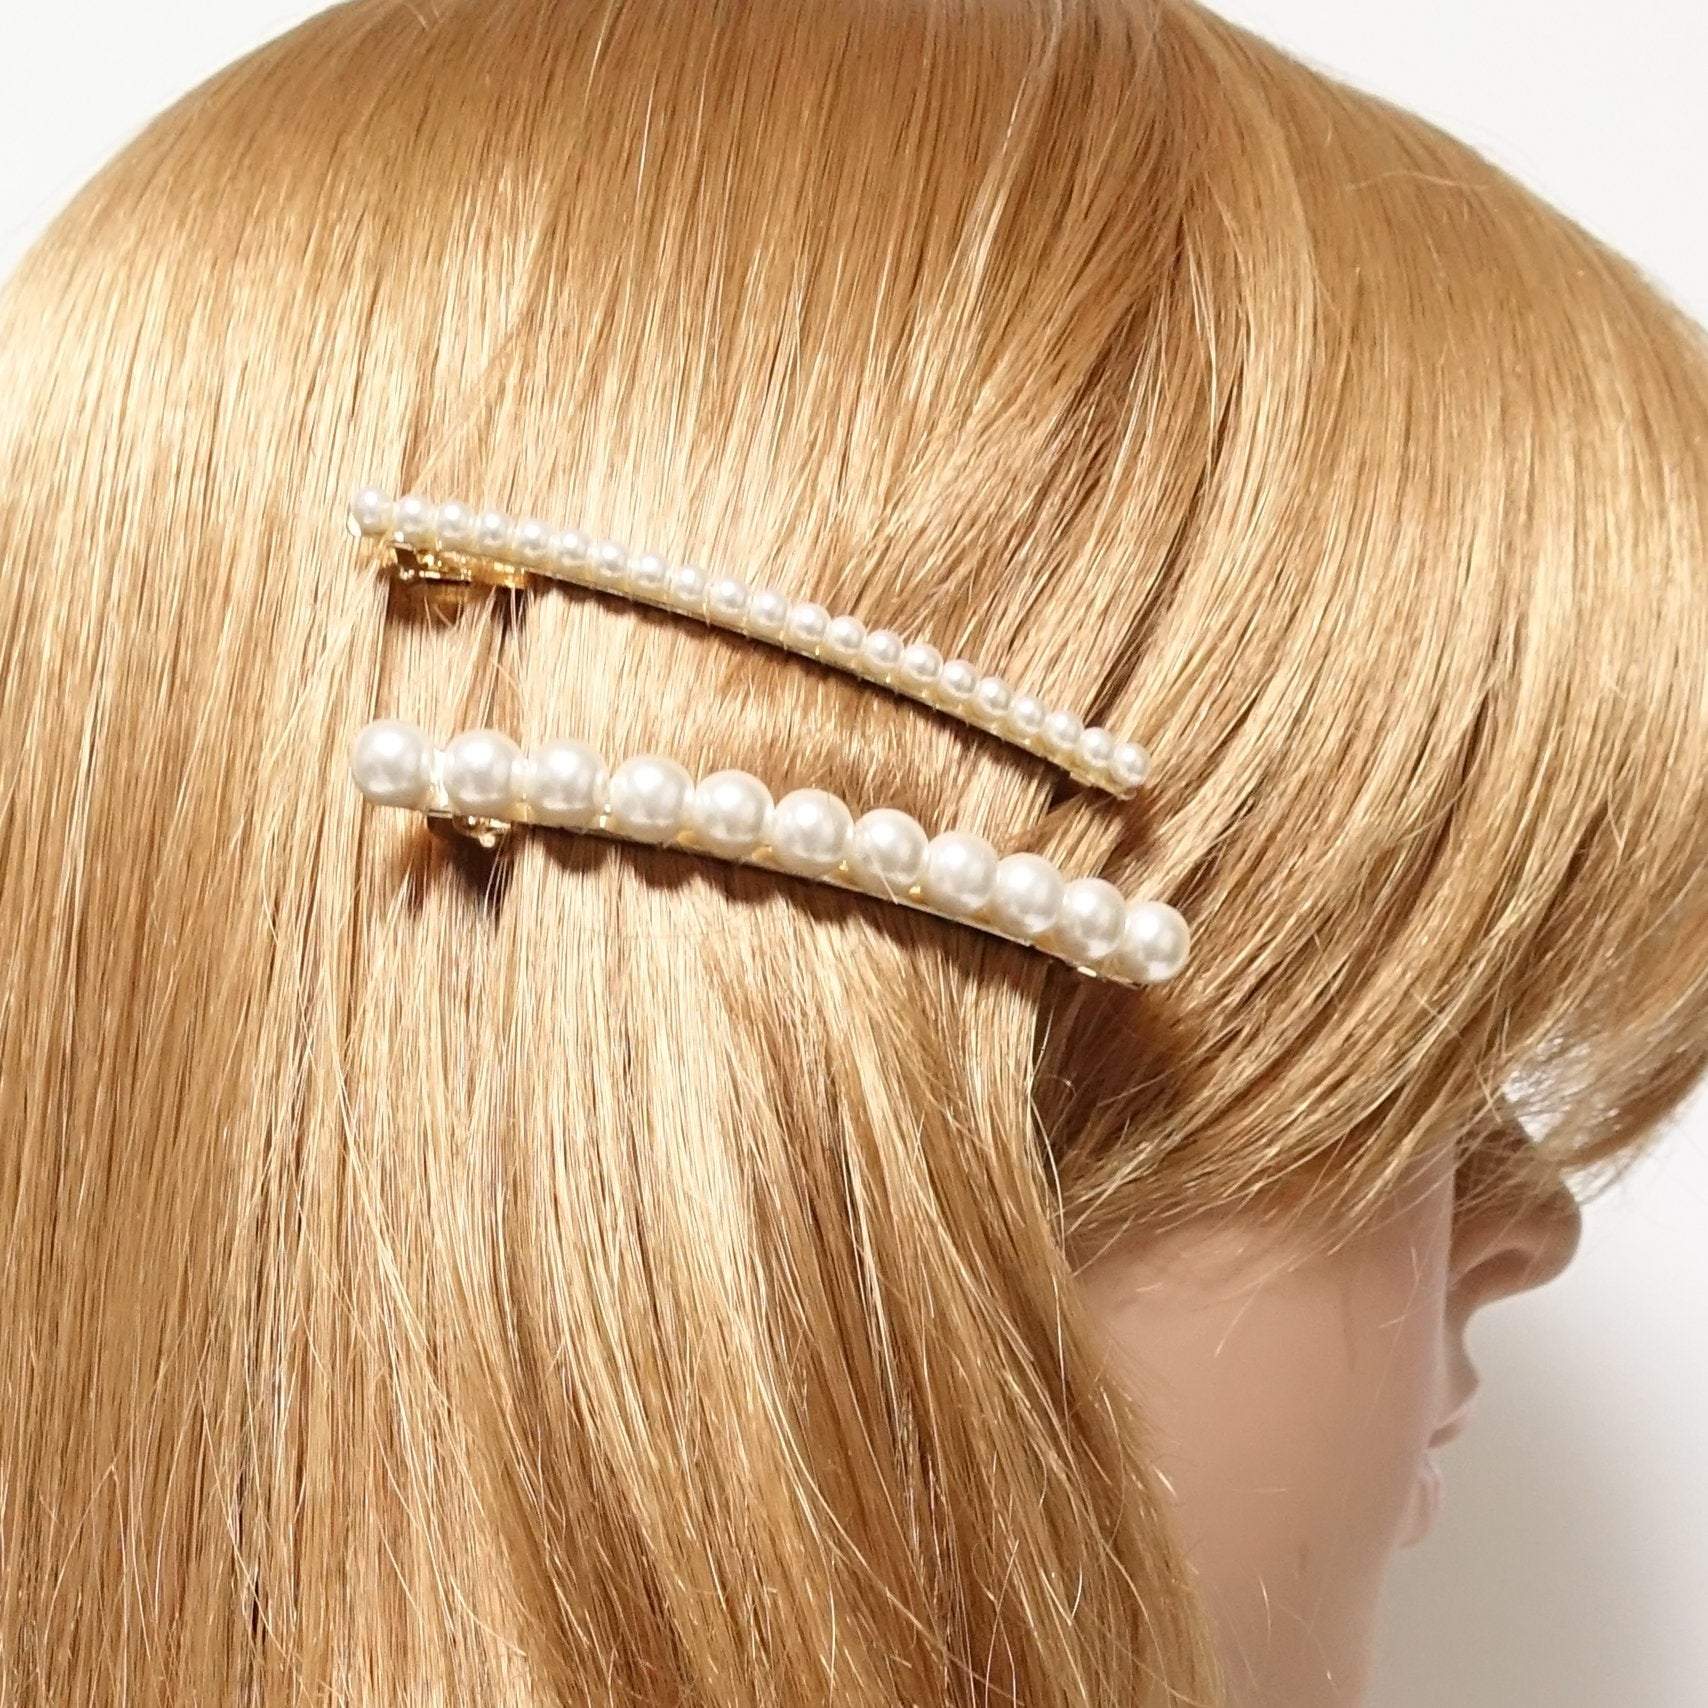 2Pcs Pearl Hair Clips Large Hair Pins Barrette Ties for Women Girl